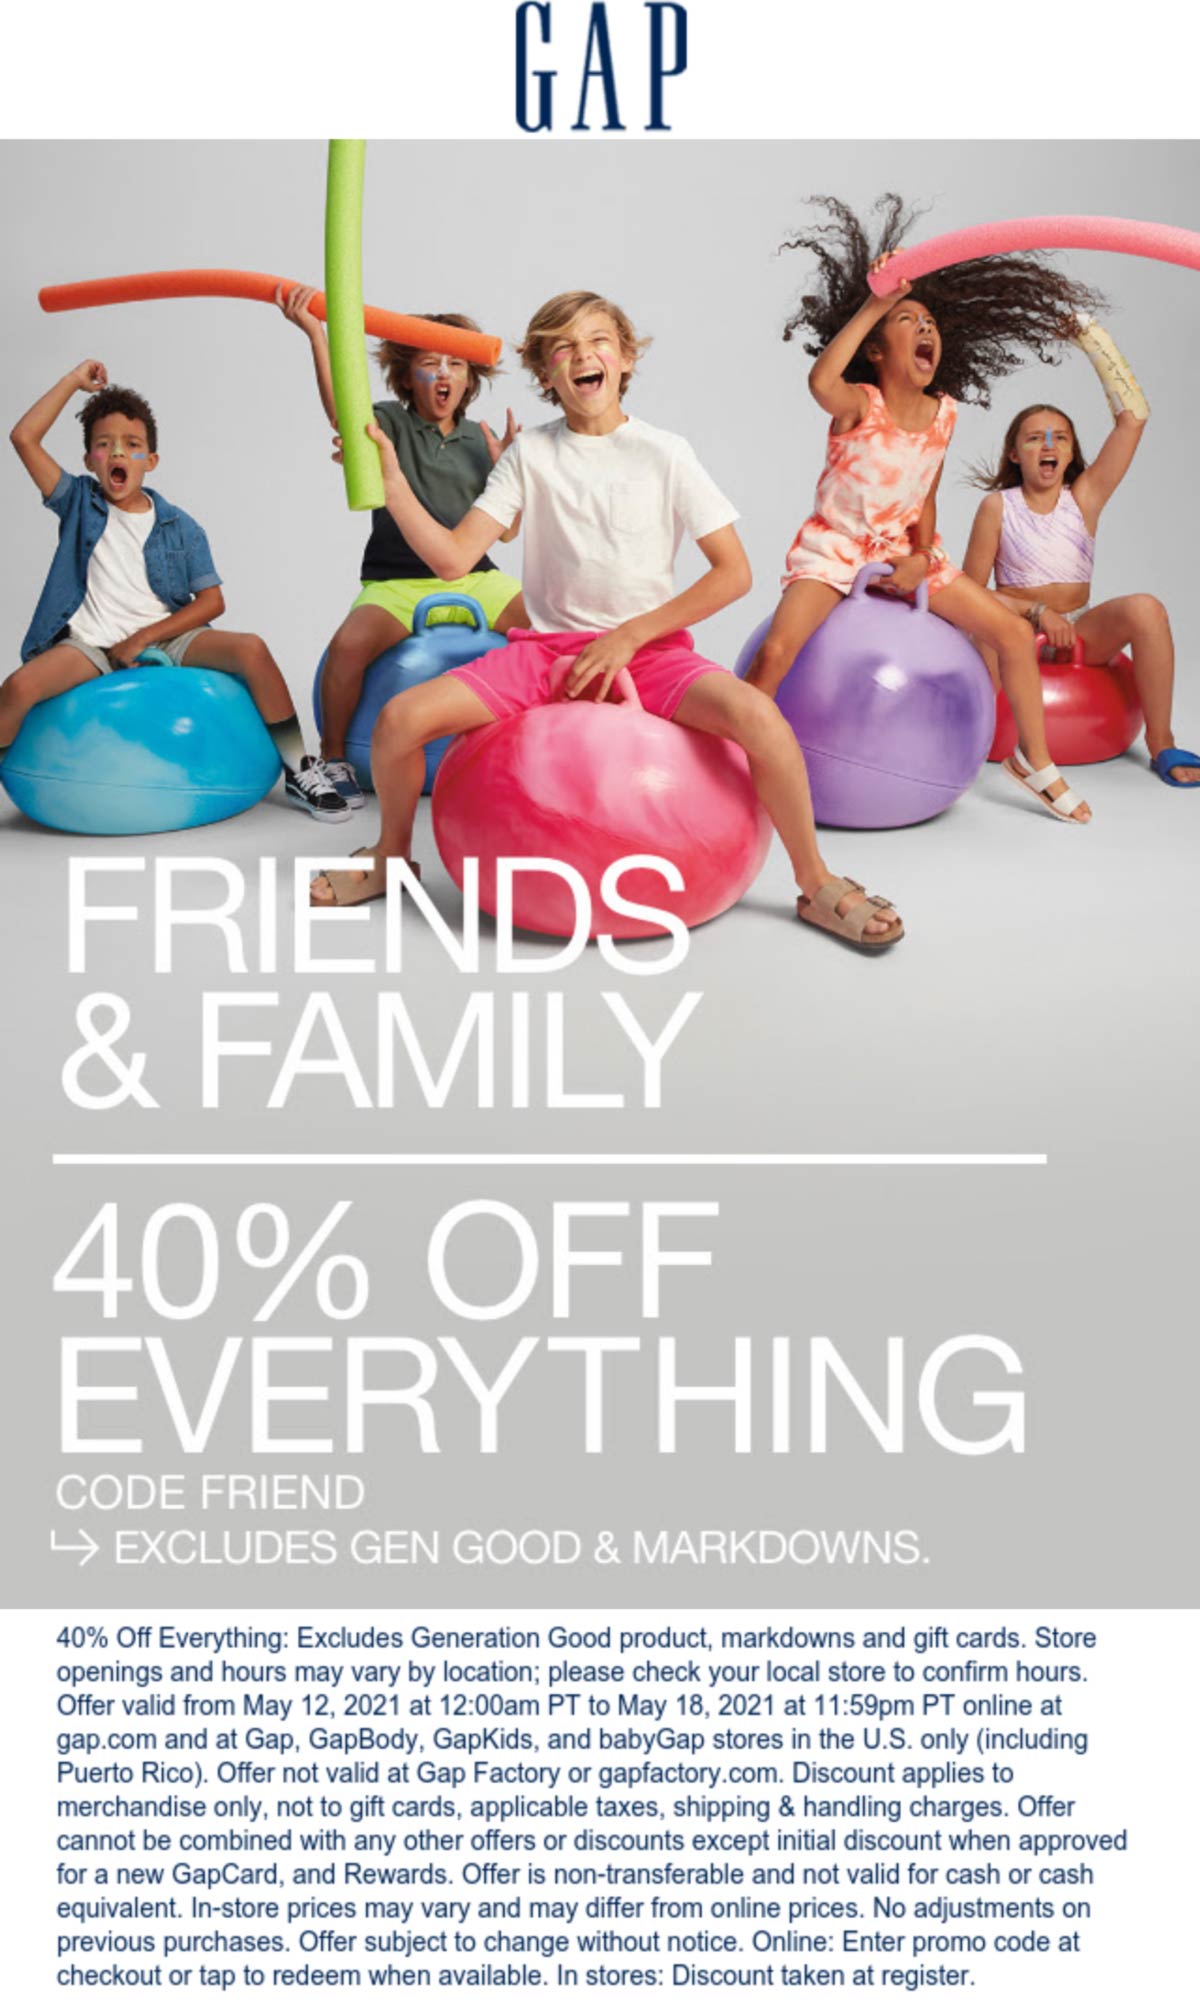 40-off-everything-at-gap-or-online-via-promo-code-friend-gap-the